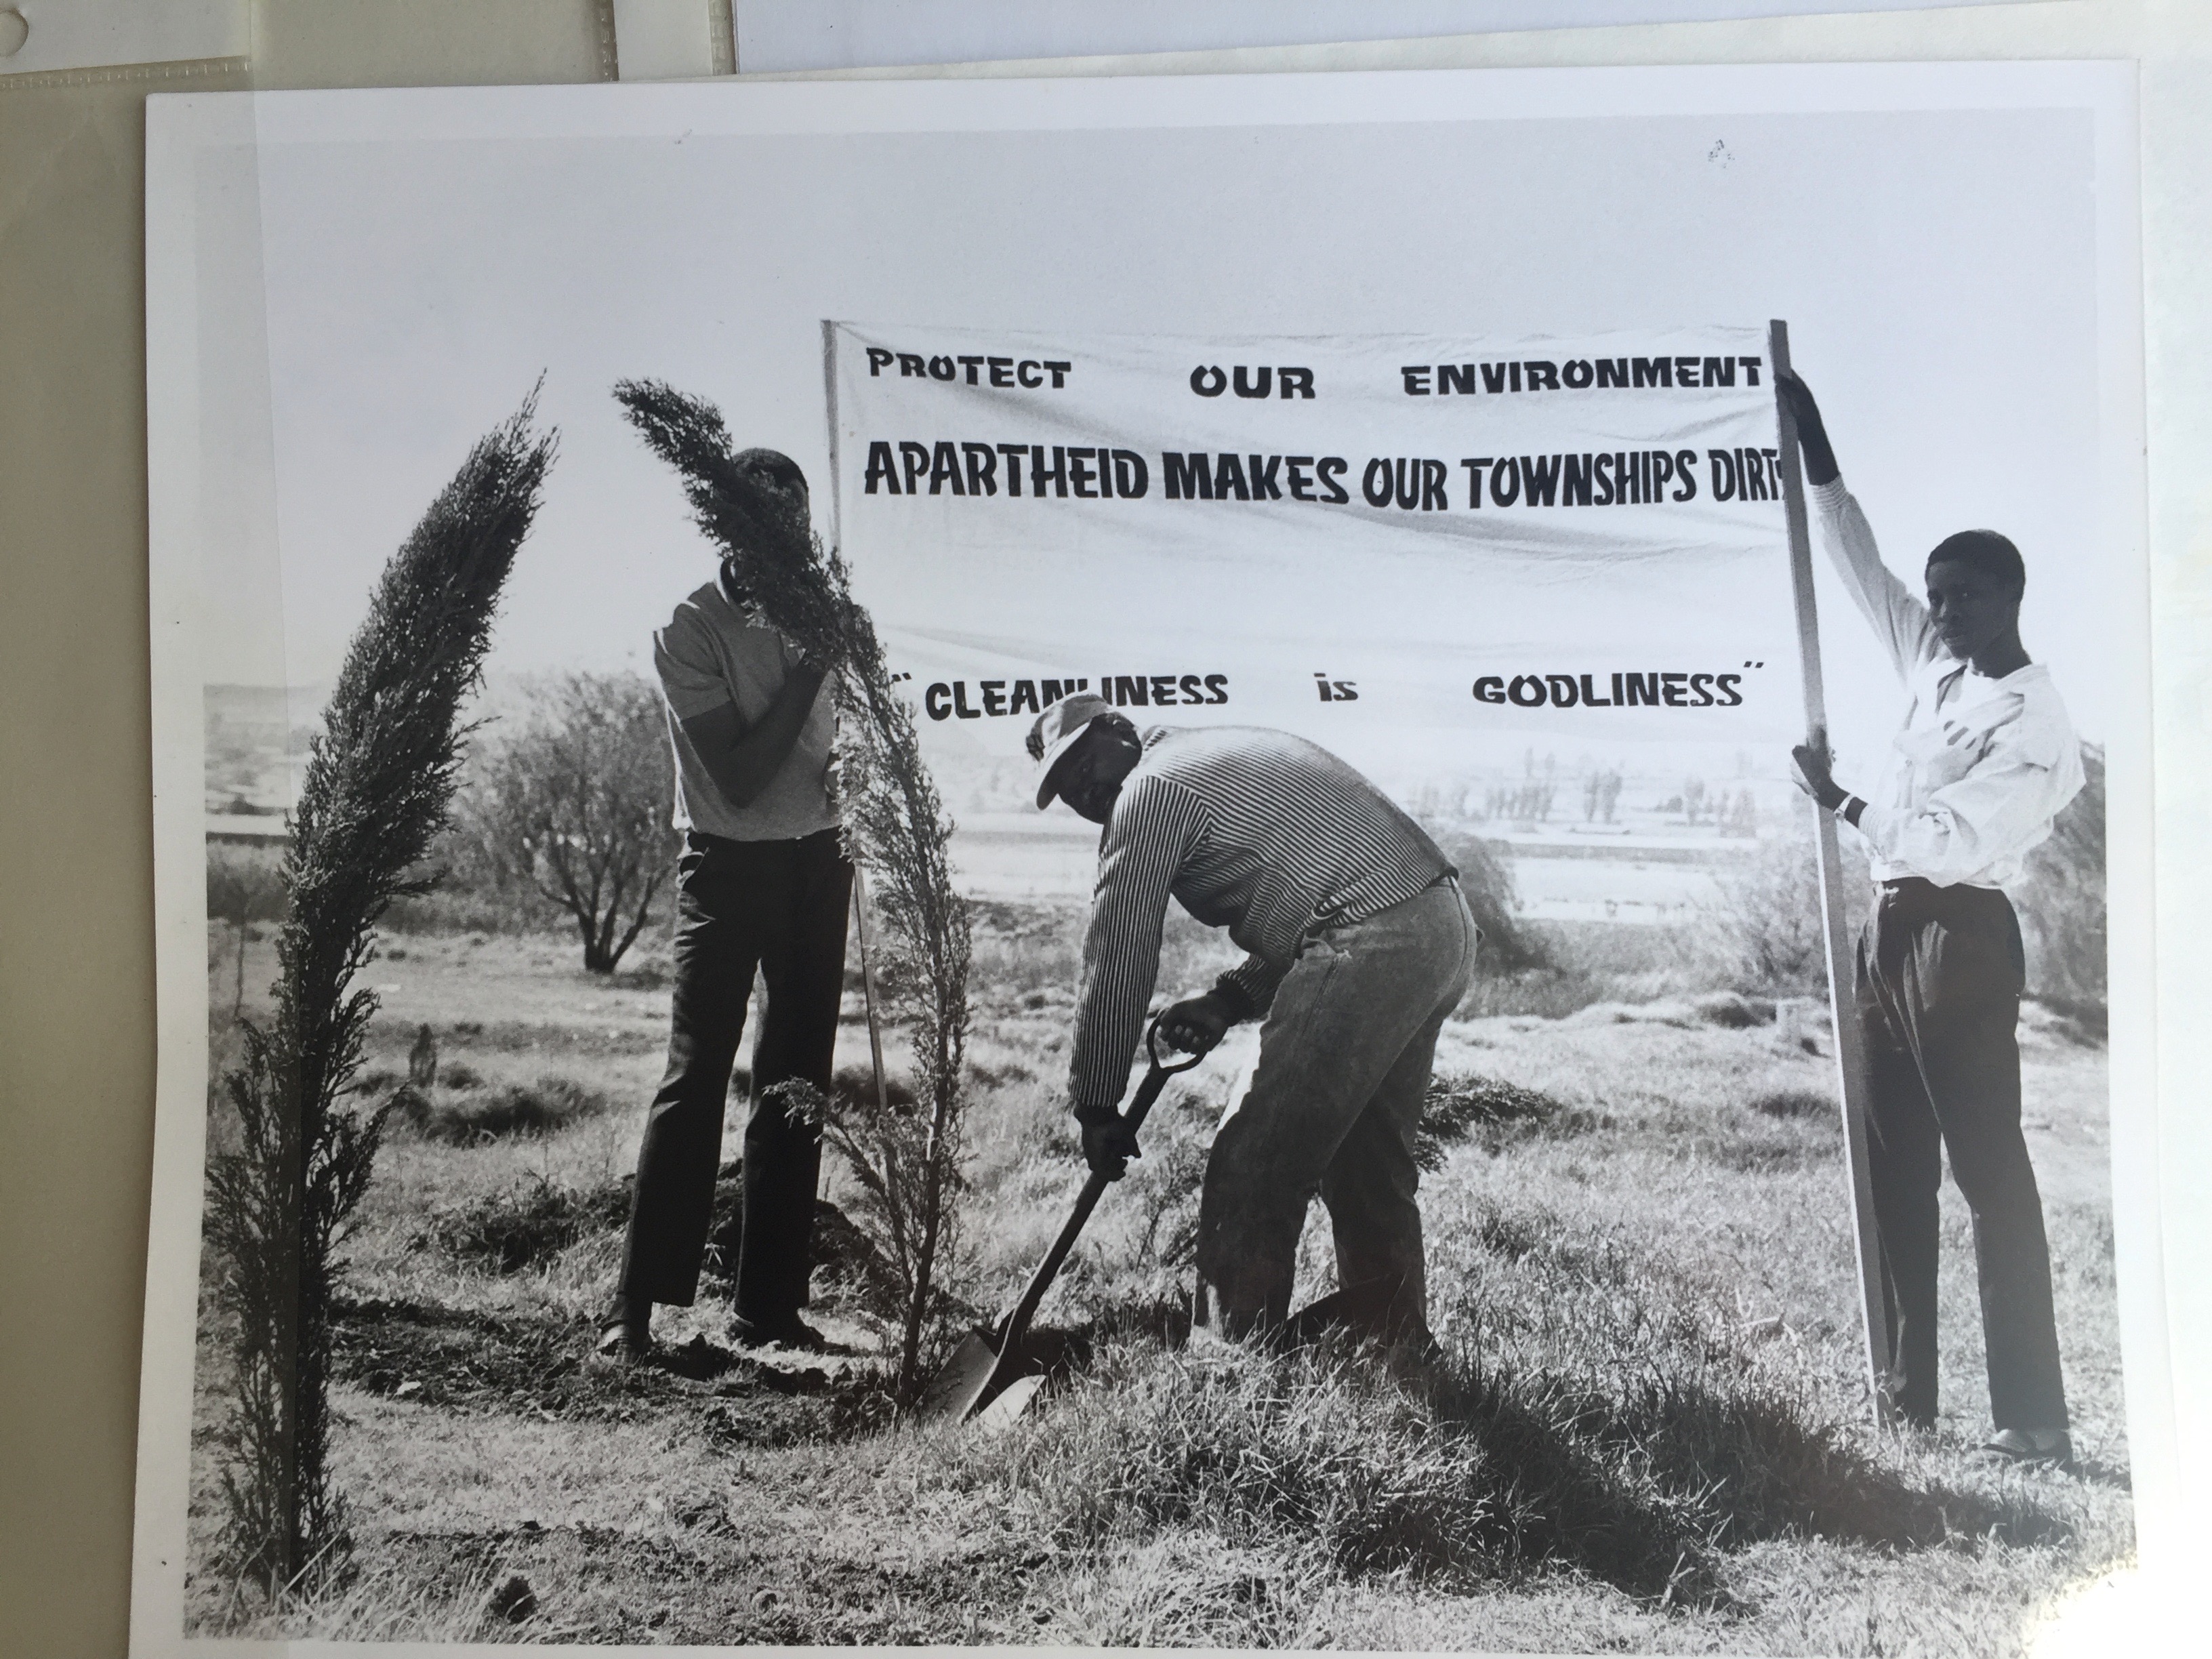 Japhta Lekgetho, president of the NEAC, plants a tree in Soweto, Johannesburg (1985). Courtesy of the People’s Parks Archive.